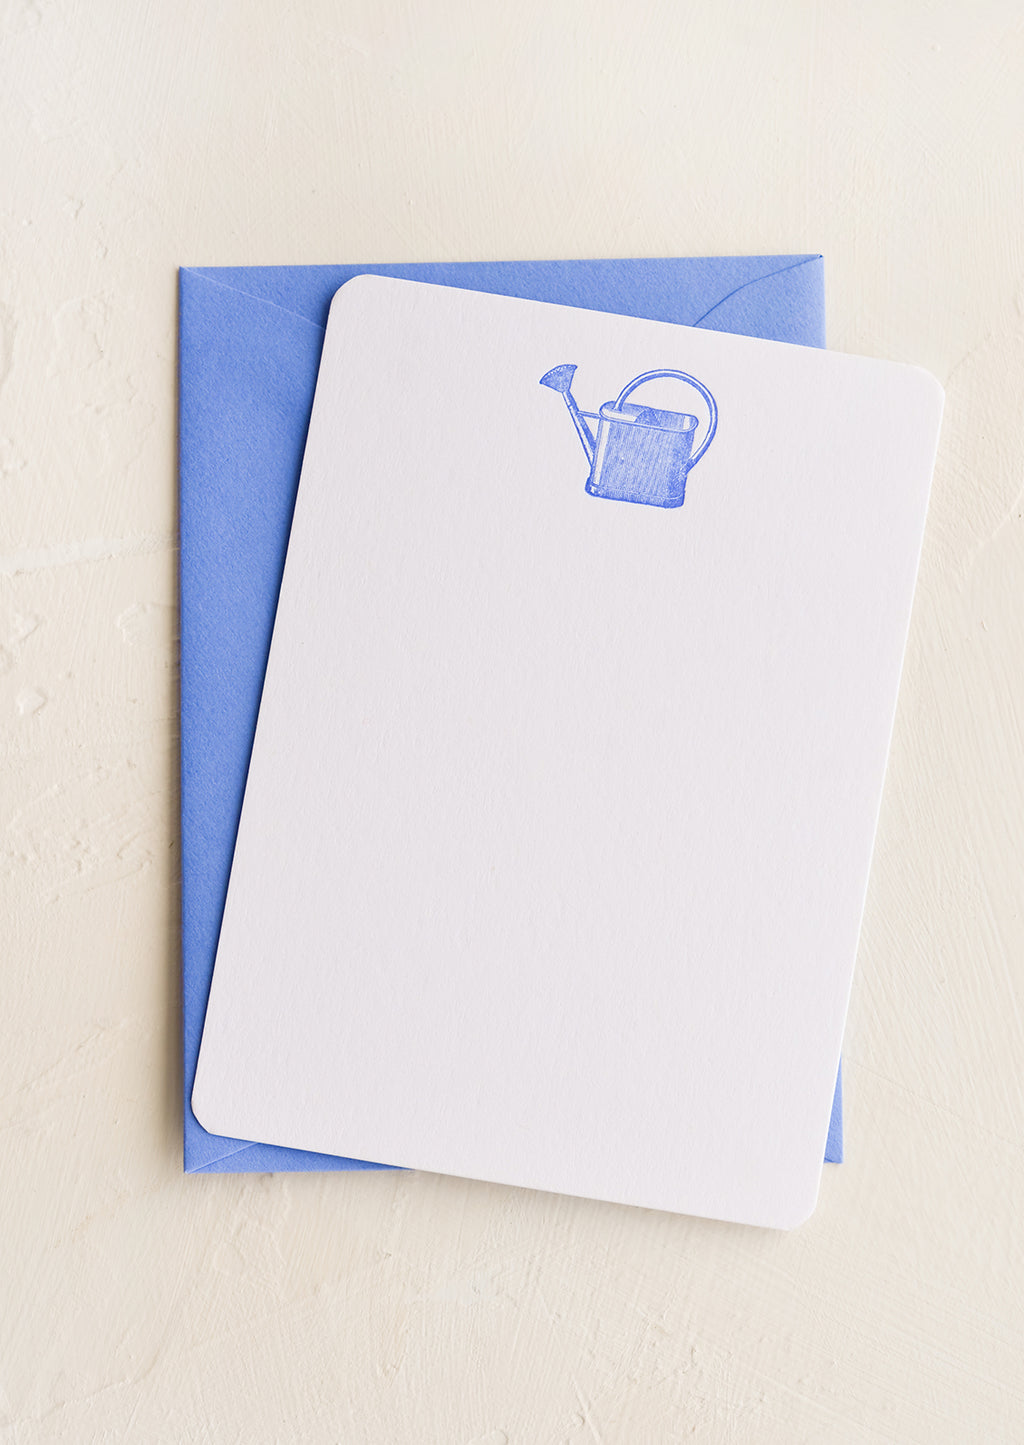 Watering Can: A white notecard with blue watering can letterpress printed at top, with blue envelope.